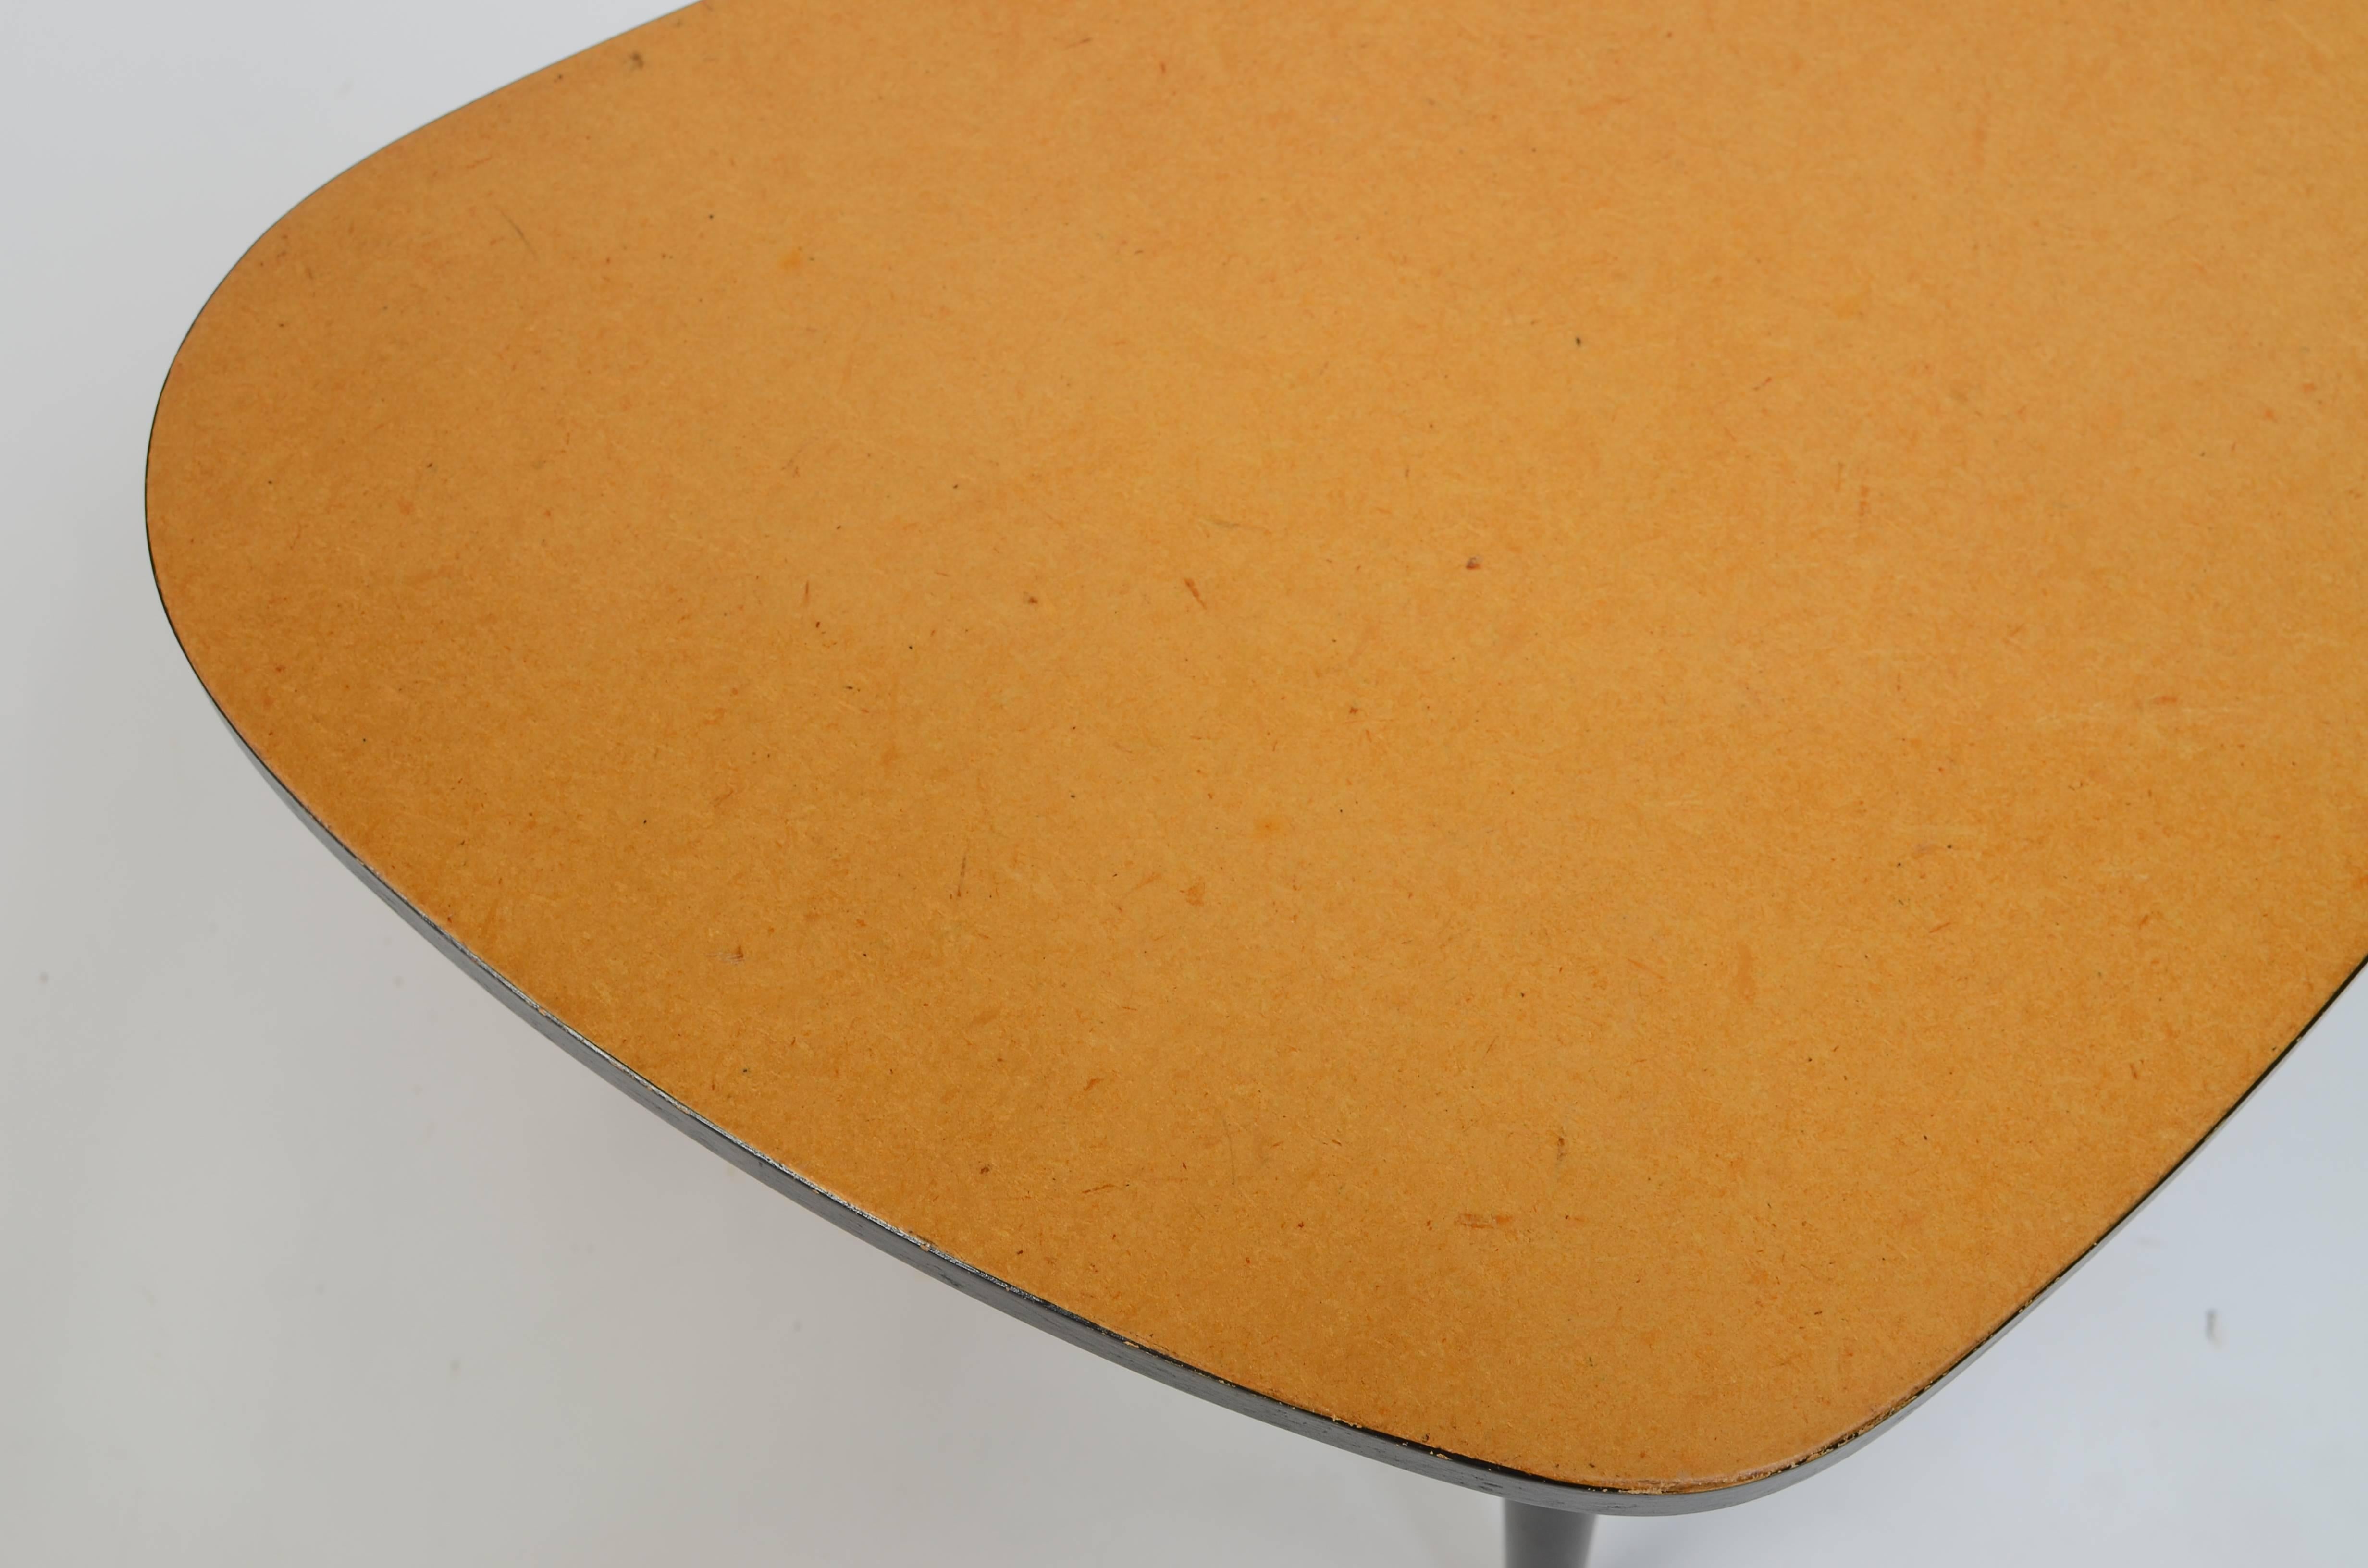 Mid-20th Century Lacquered Cork Side Table by Maruni, Japan, 1955 For Sale